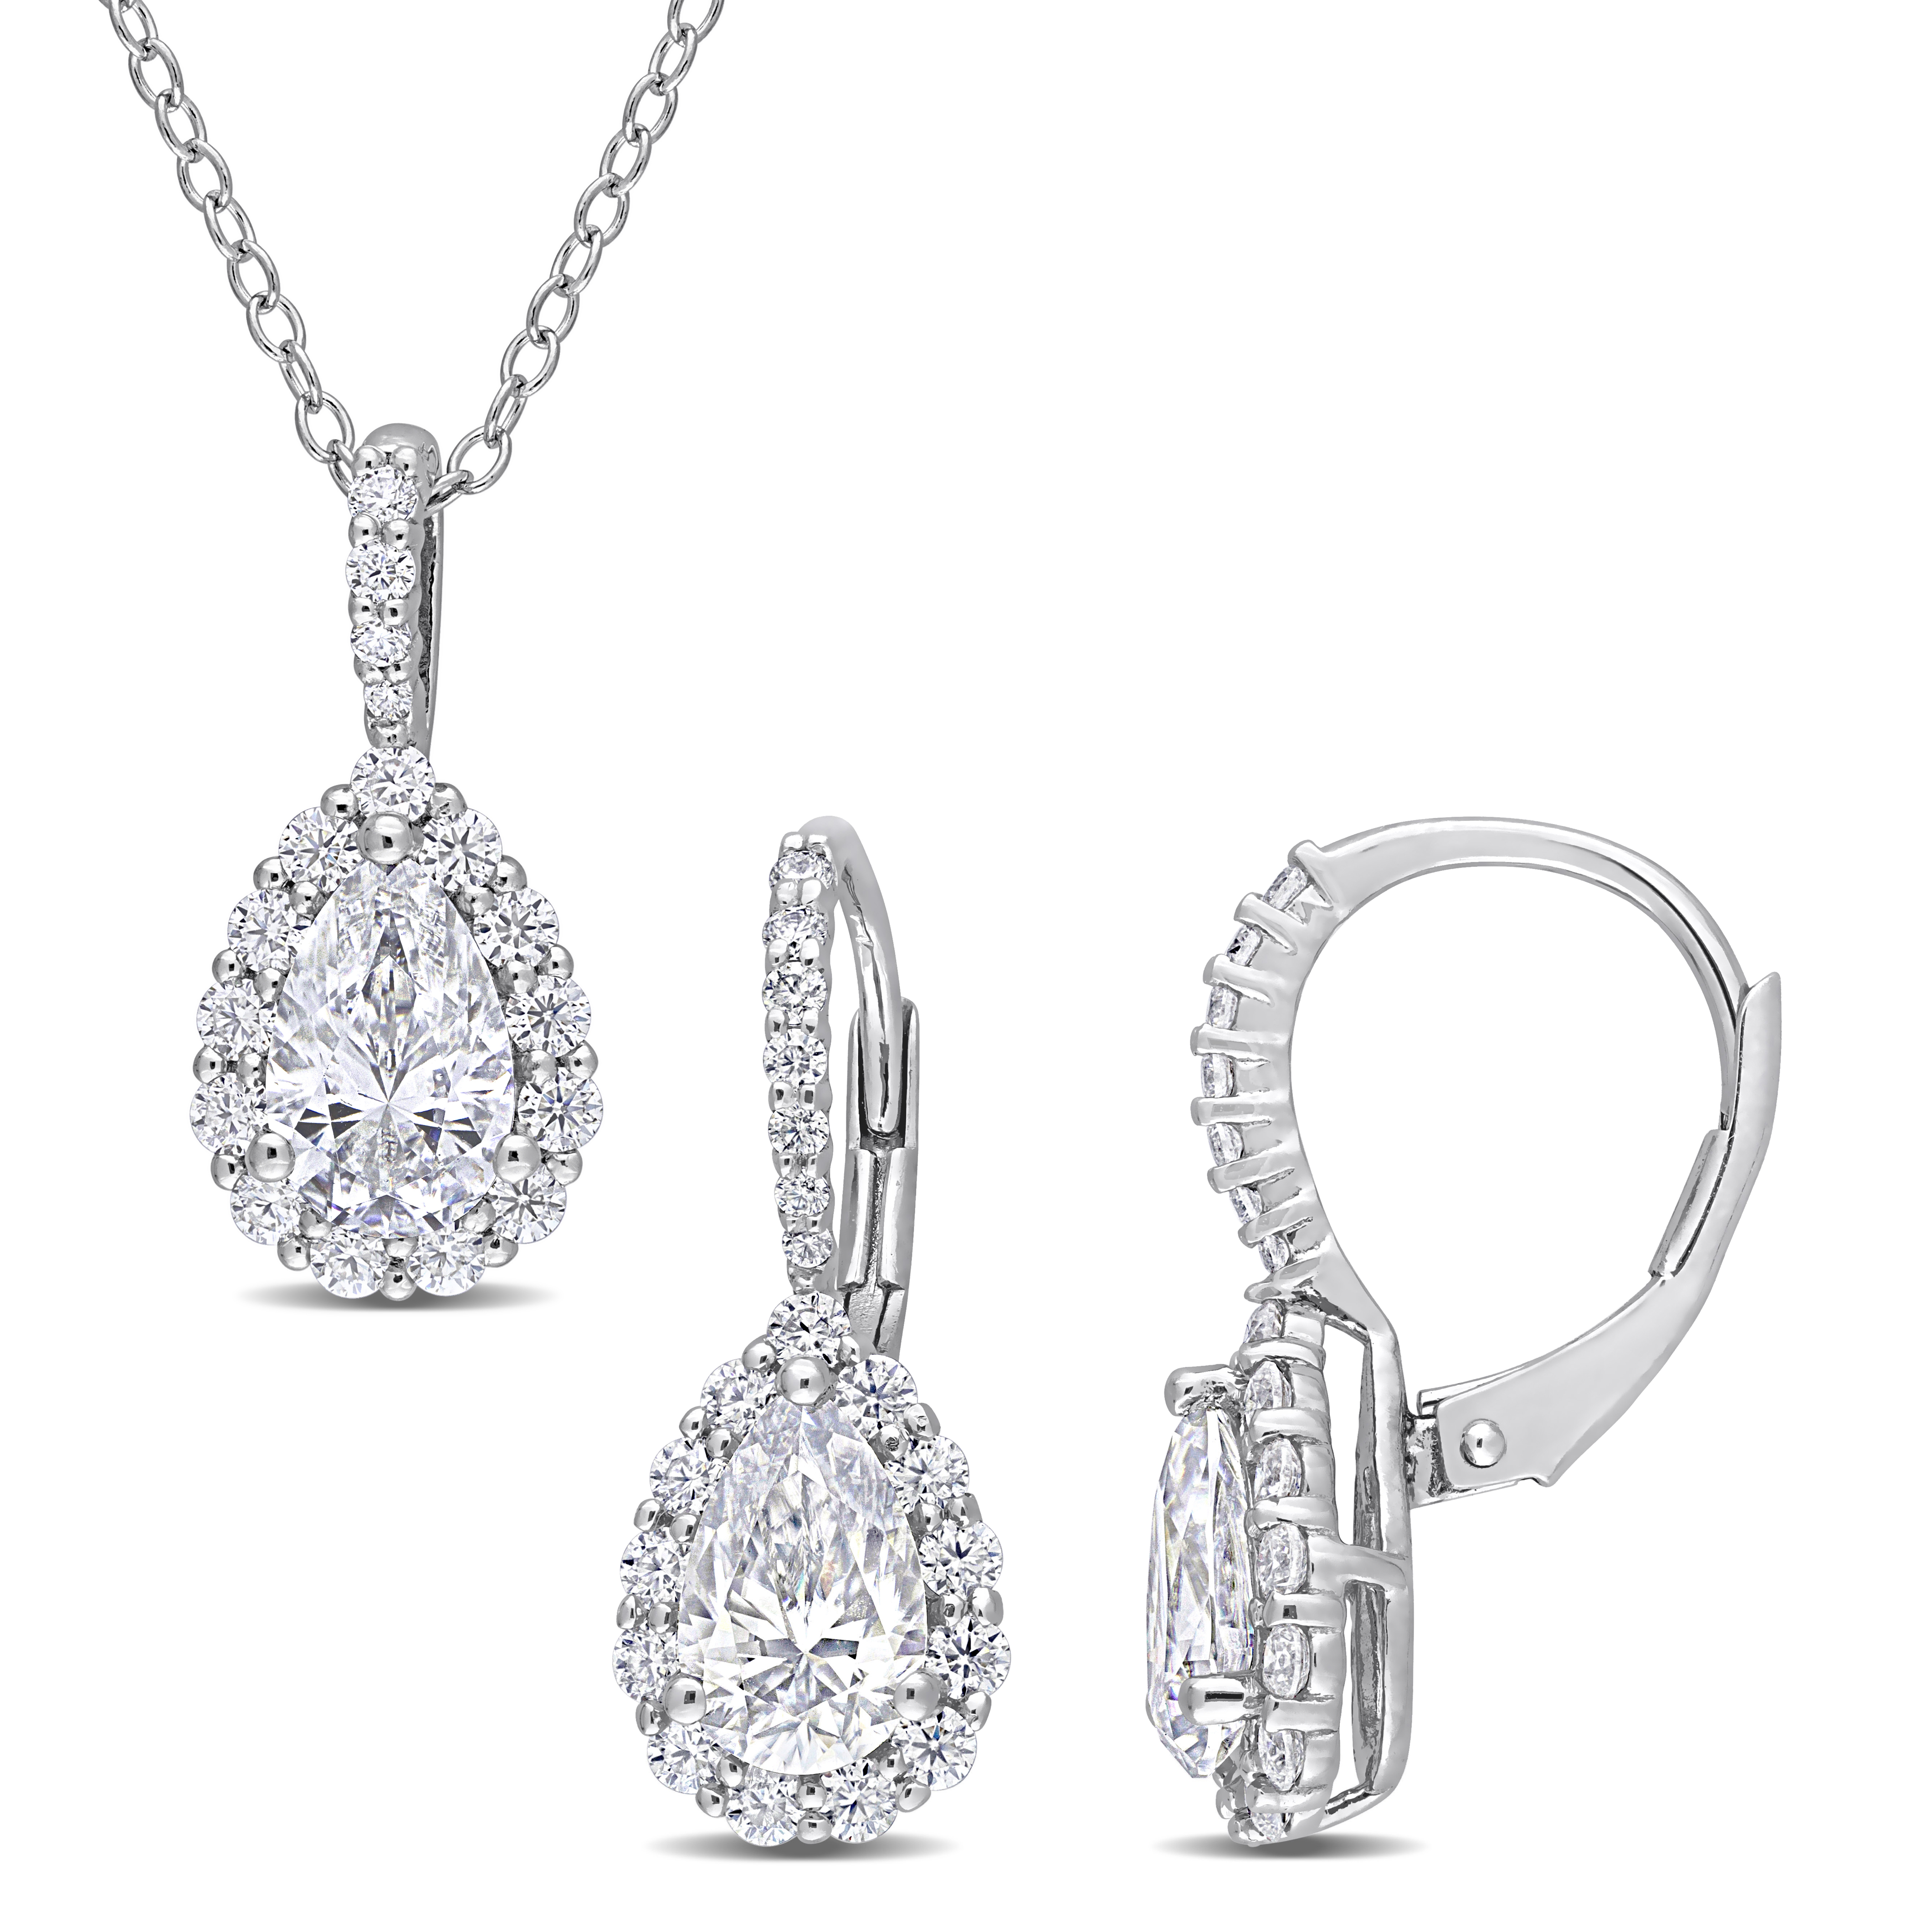 3 7/8 CT TGW Pear Shaped Moissanite Halo Pendant with Chain and Leverback Earrings 2-Piece Set in Sterling Silver